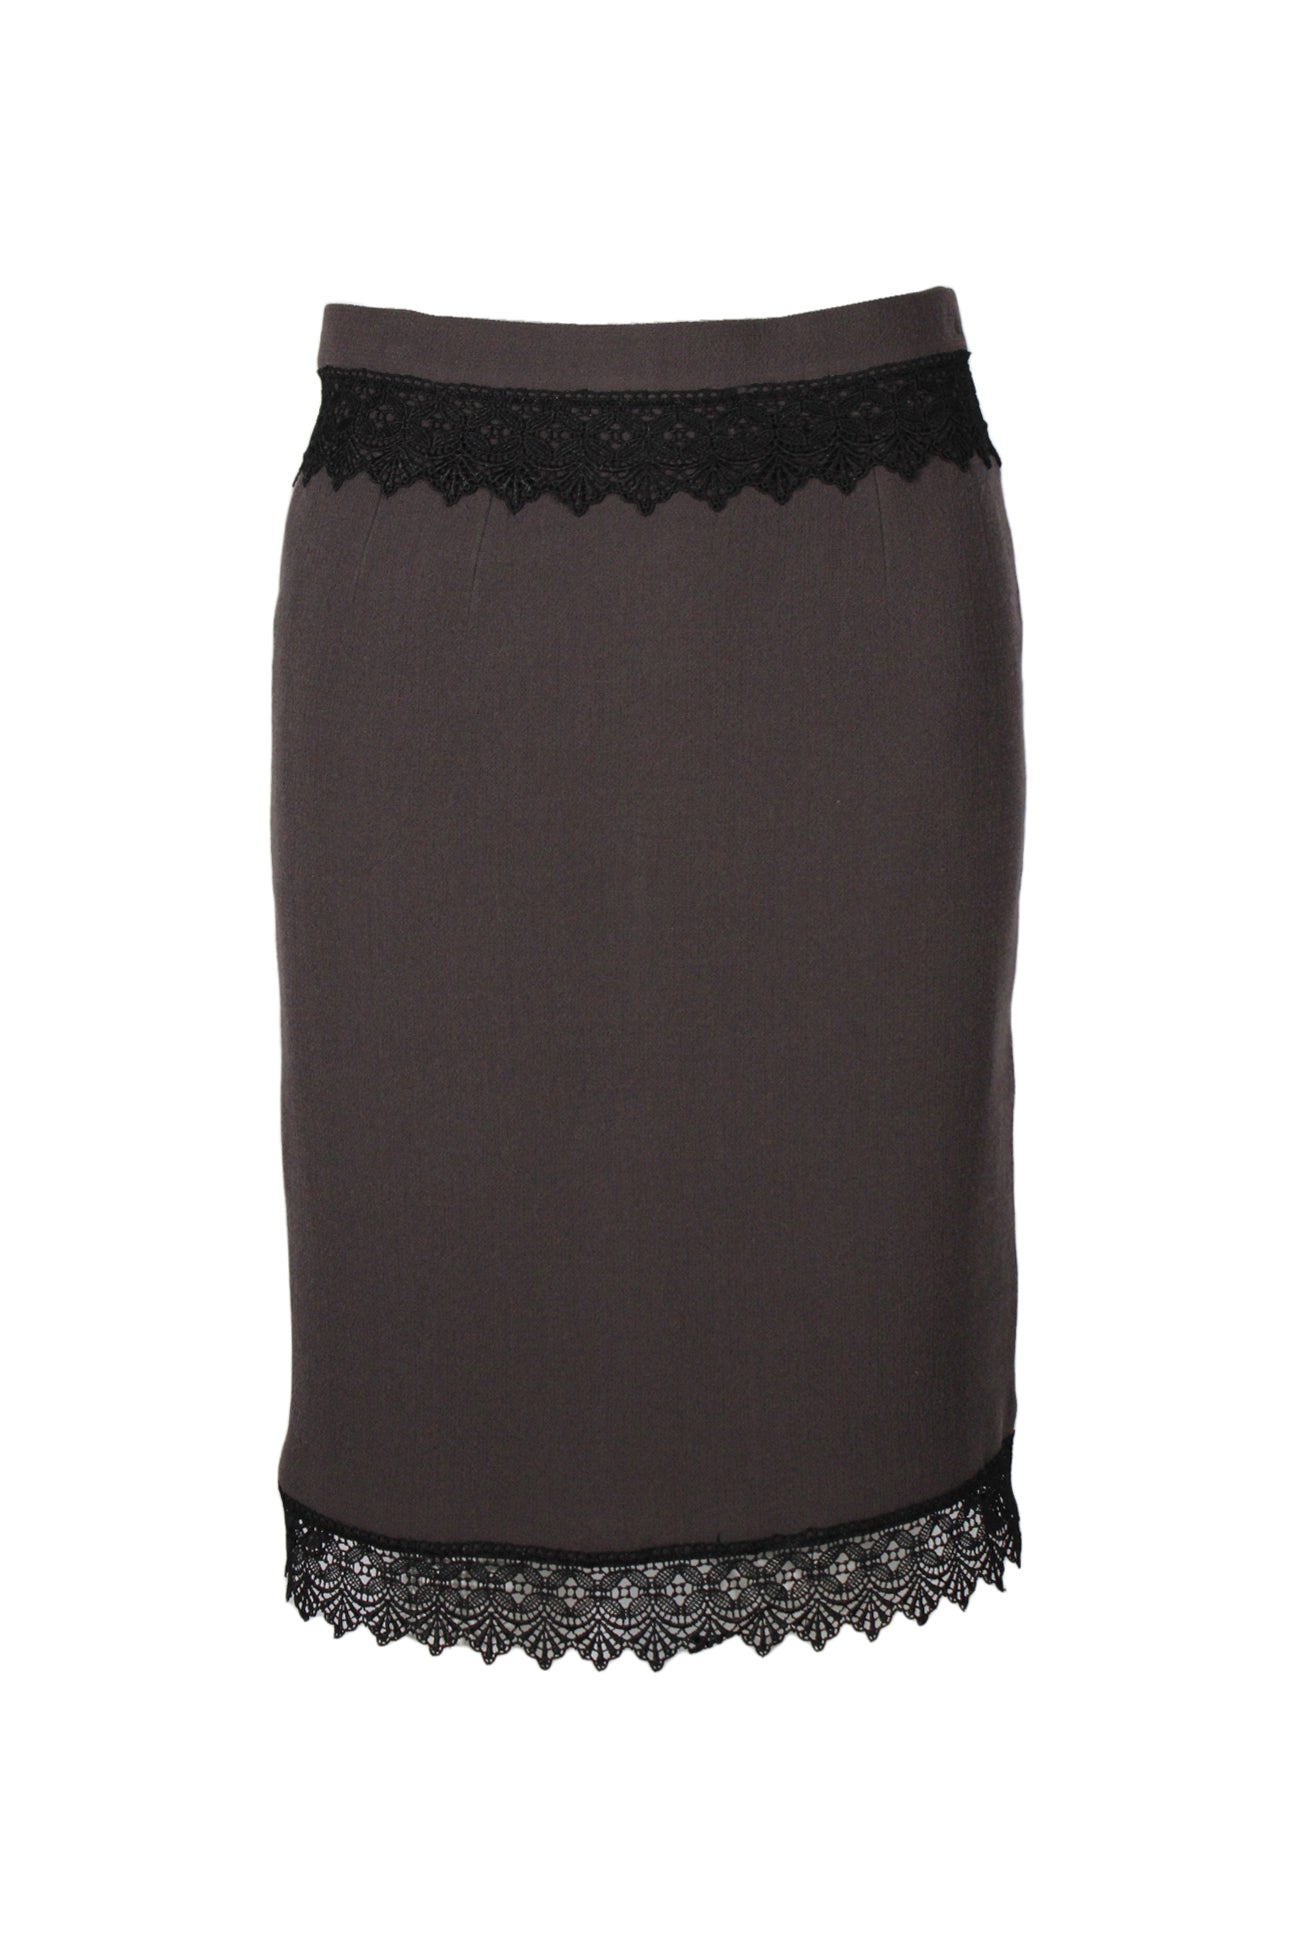 front of vintage balenciaga le dix gray lace midi skirt. features black lace detail at waist/hem, and straight fit.